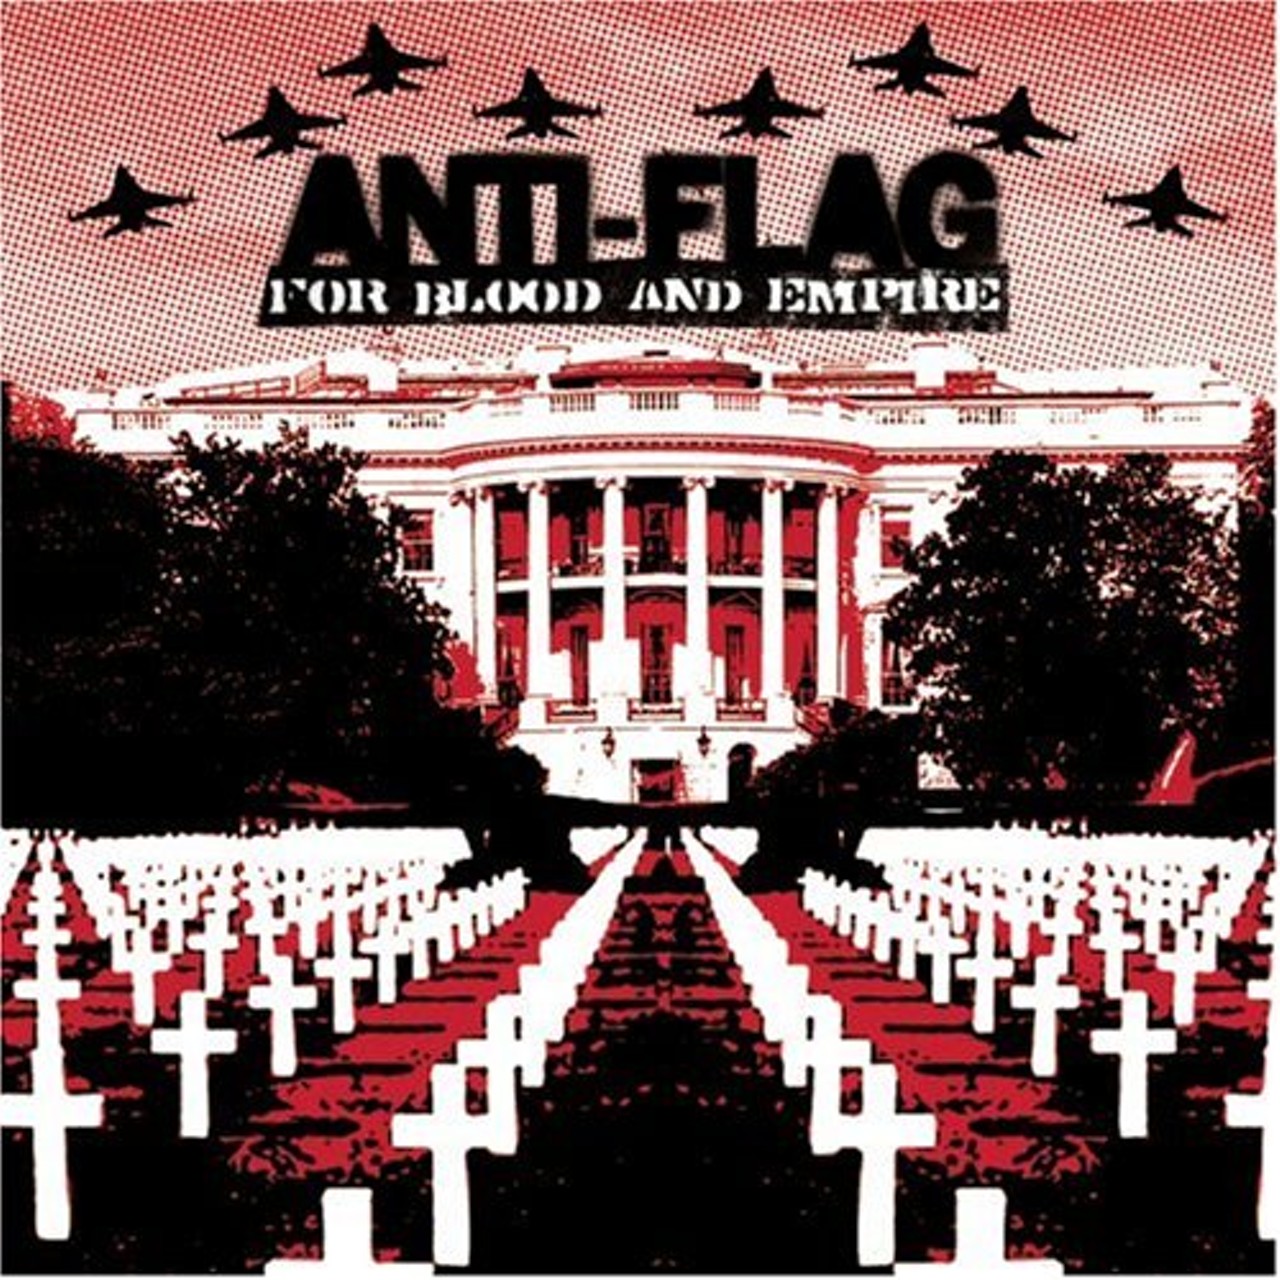 6. Yes, Anti-Flag snuck its way back into the lineup with another awesome cover. For their "For Blood and Empire," the White House is tainted black and red, its palatial front lawn lined with grave markers.